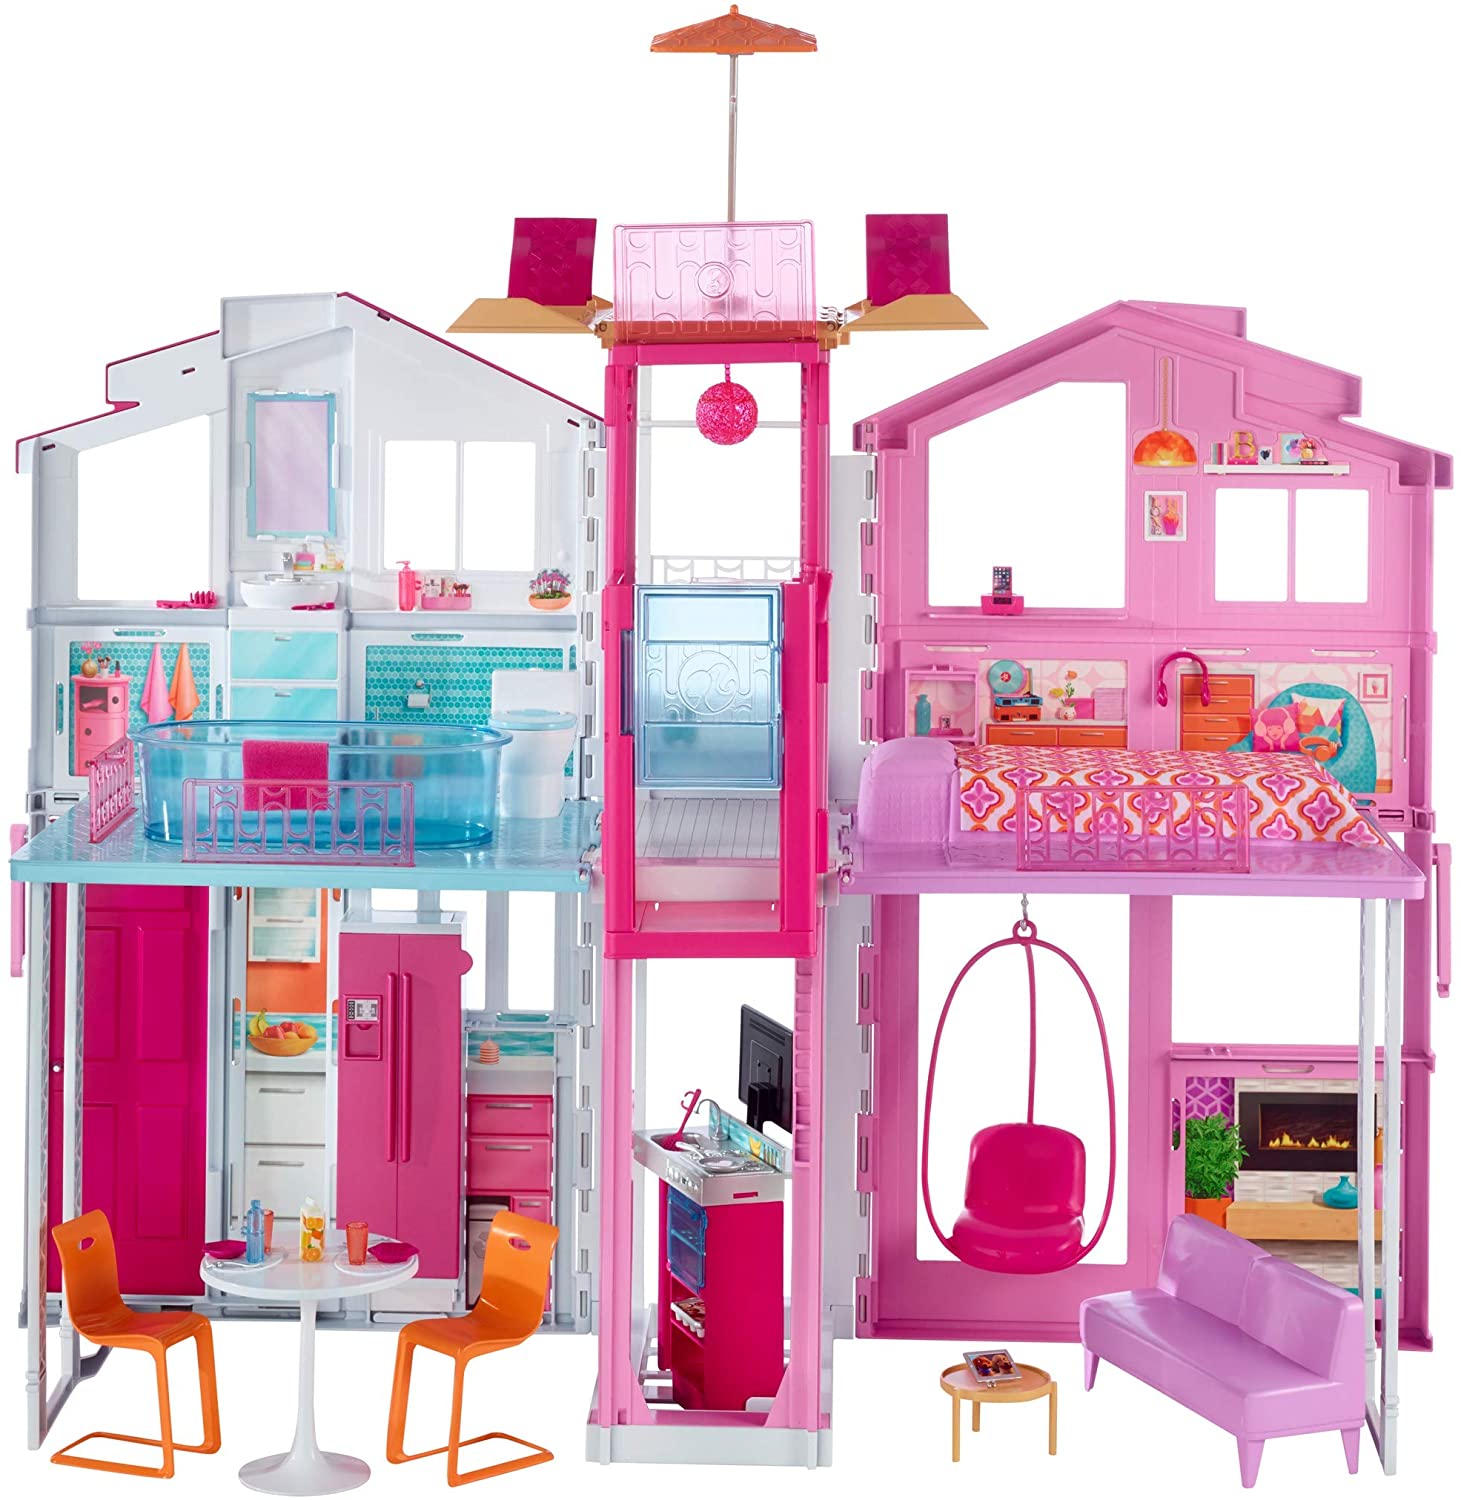 Review of Barbie 3-Story House with Pop-Up Umbrella